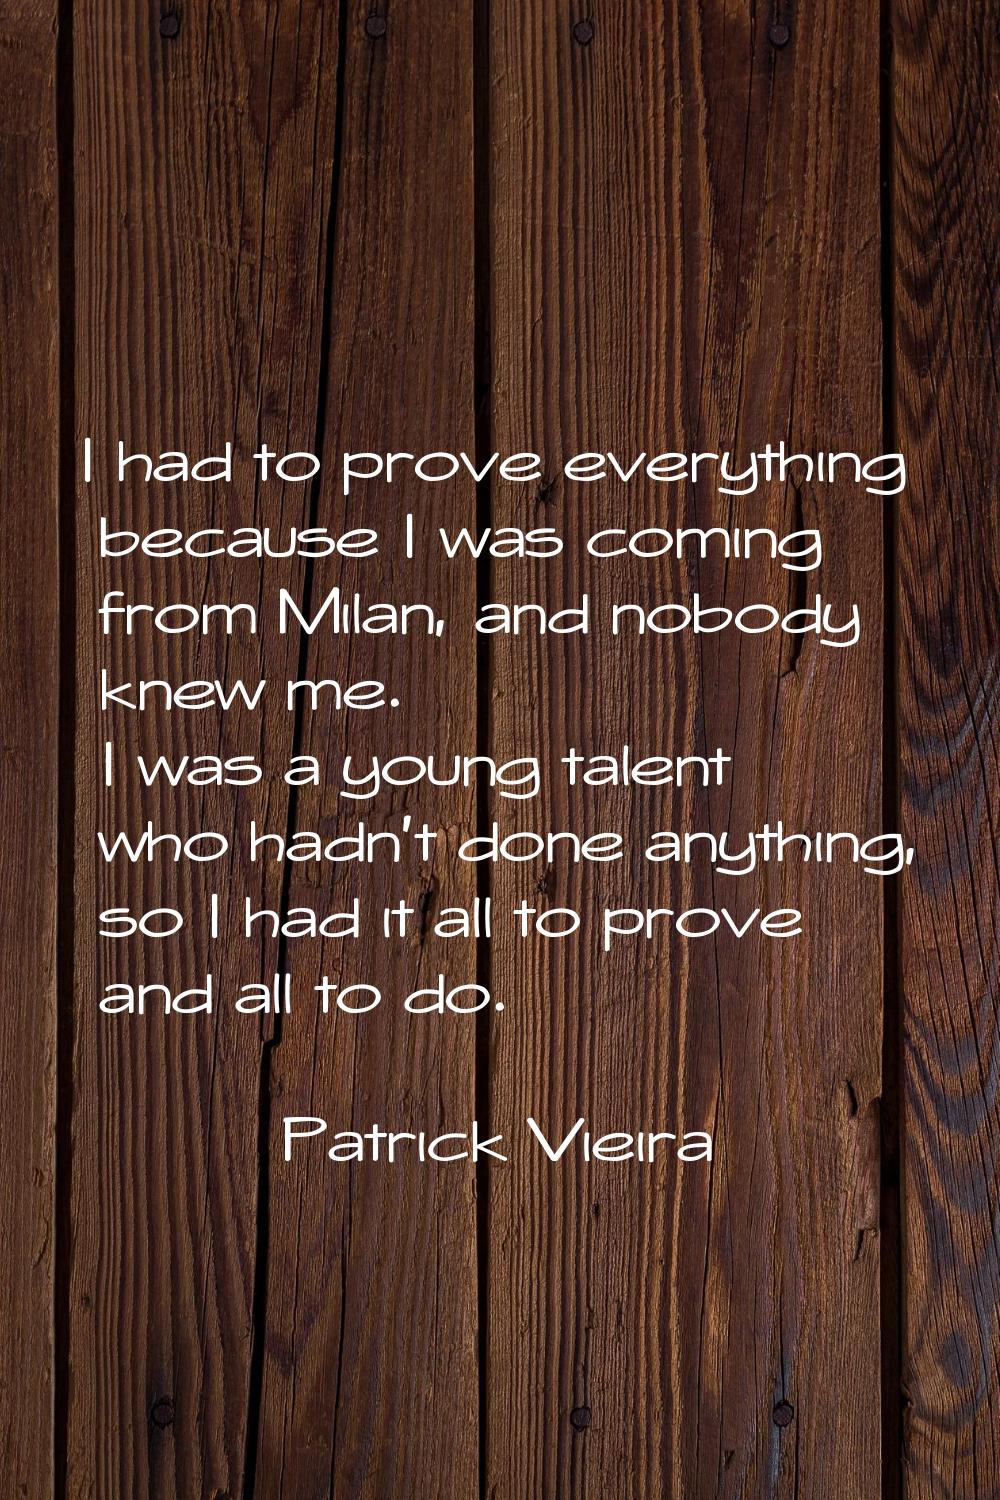 I had to prove everything because I was coming from Milan, and nobody knew me. I was a young talent